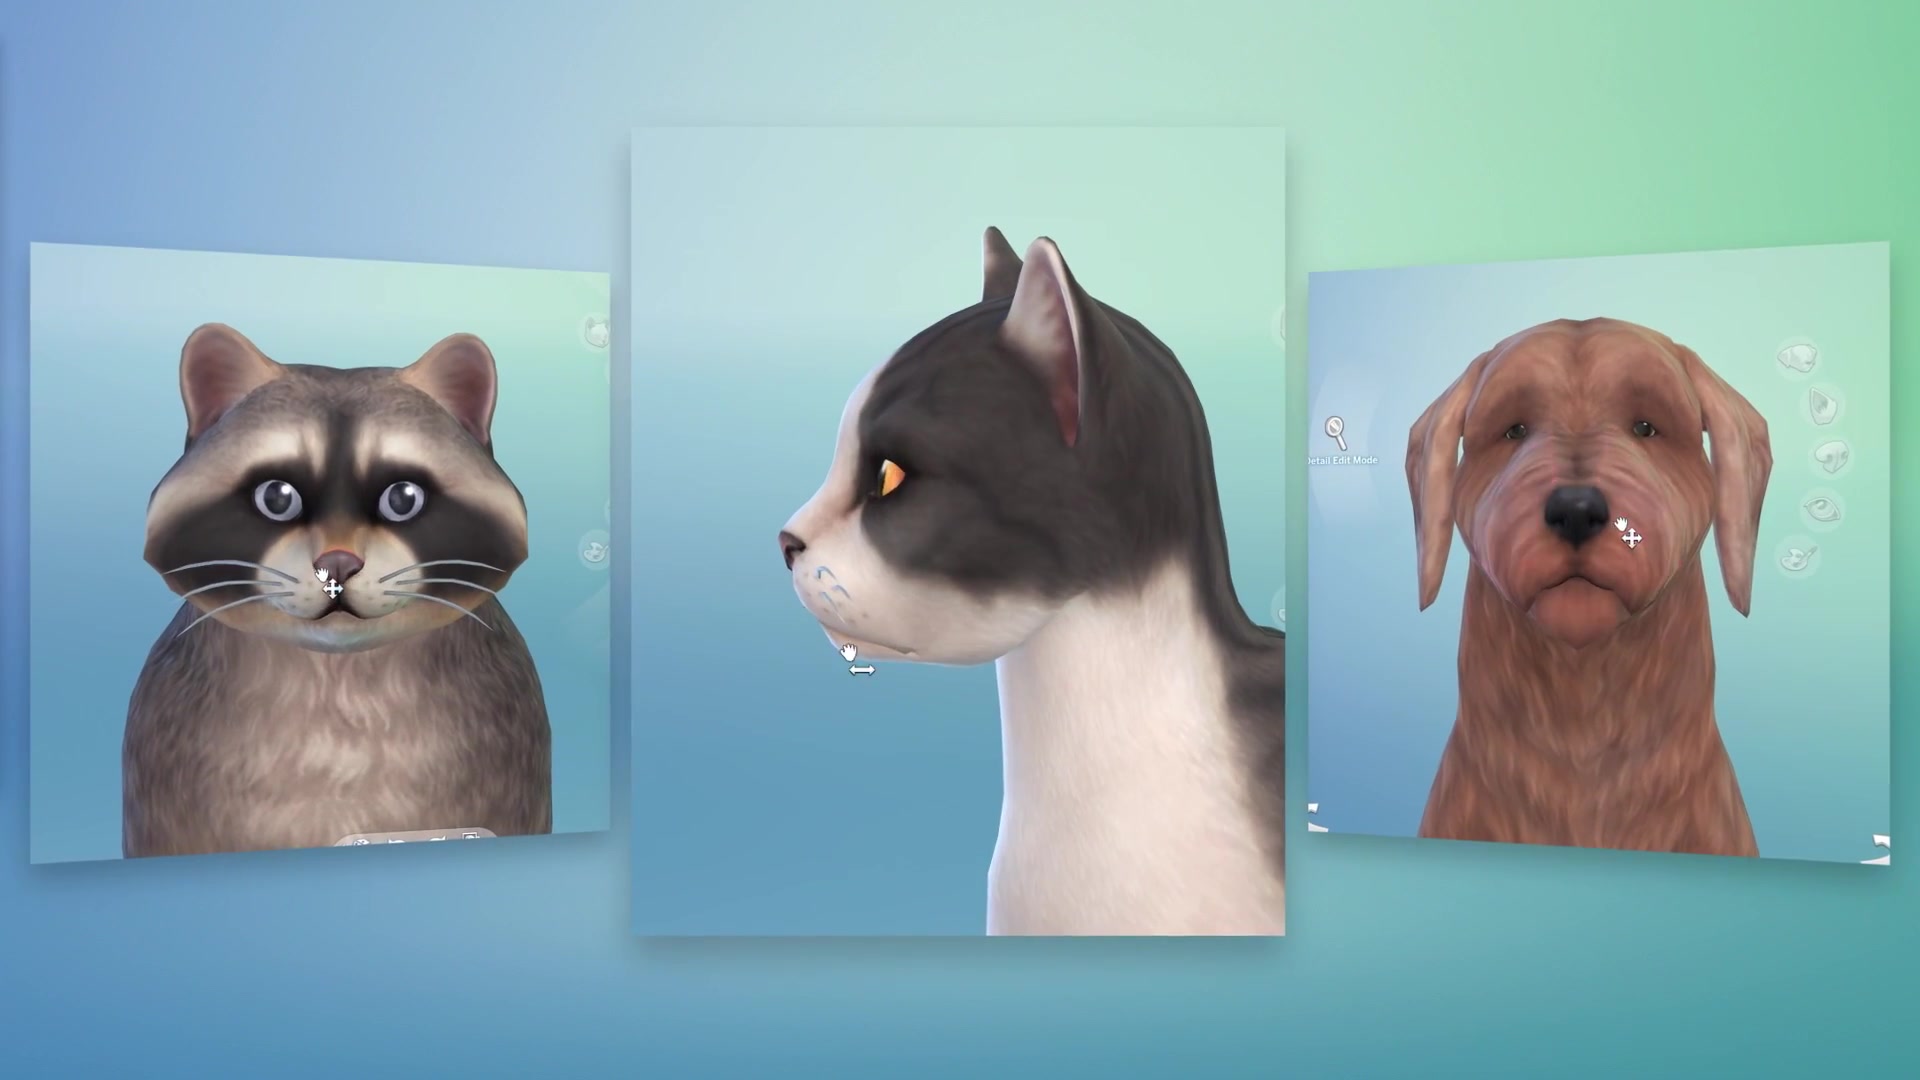 the sims 4 all dlc cats and dogs natalie